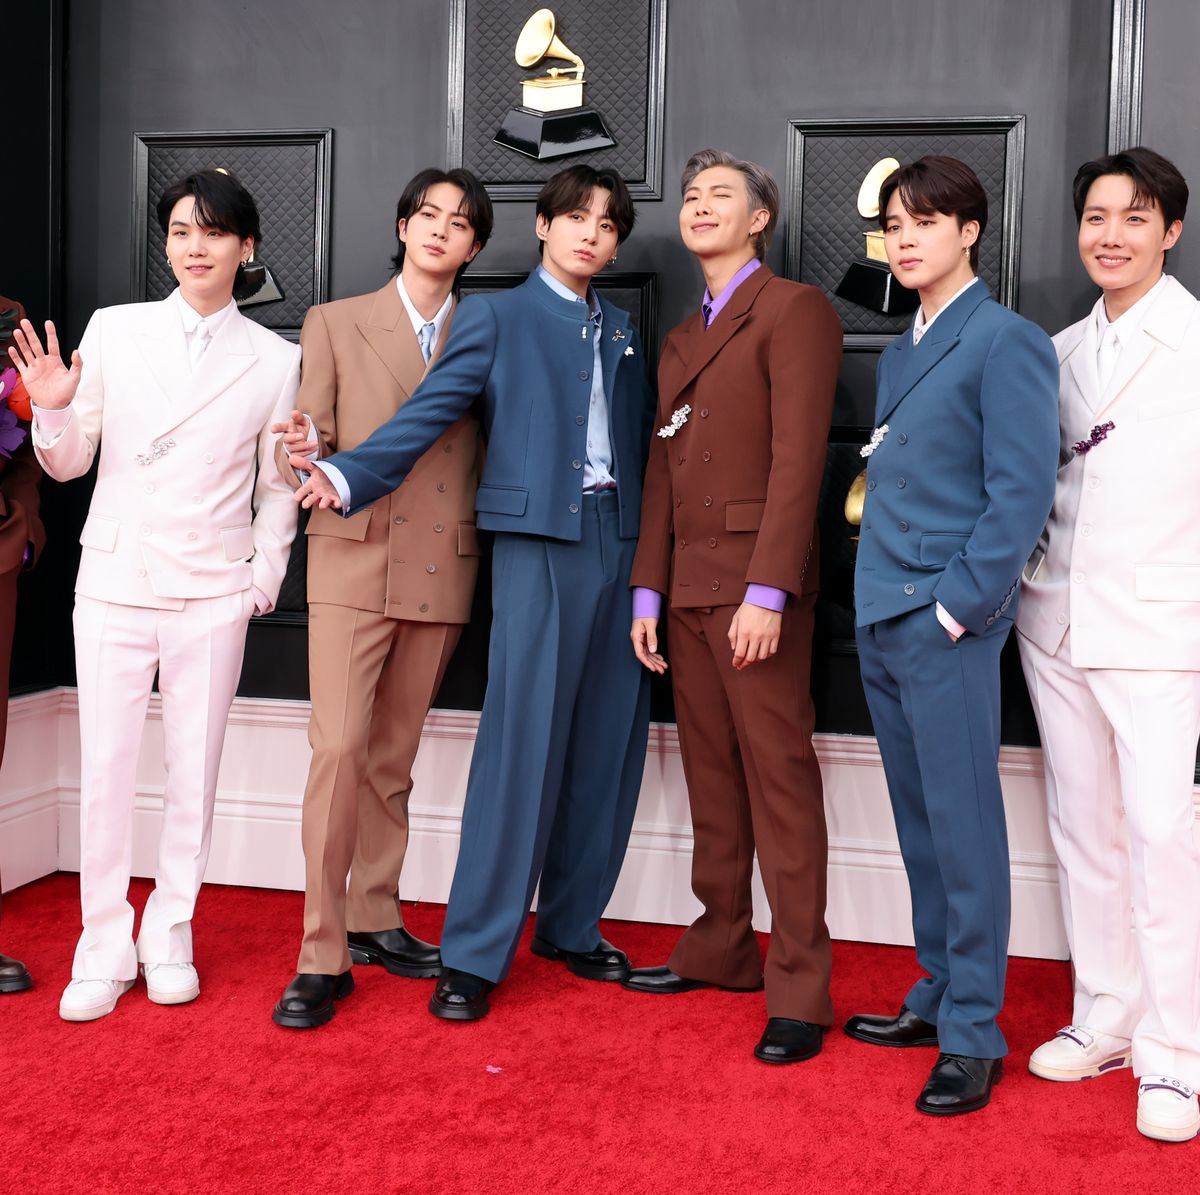 BTS nominated for Grammy award for best pop group performance